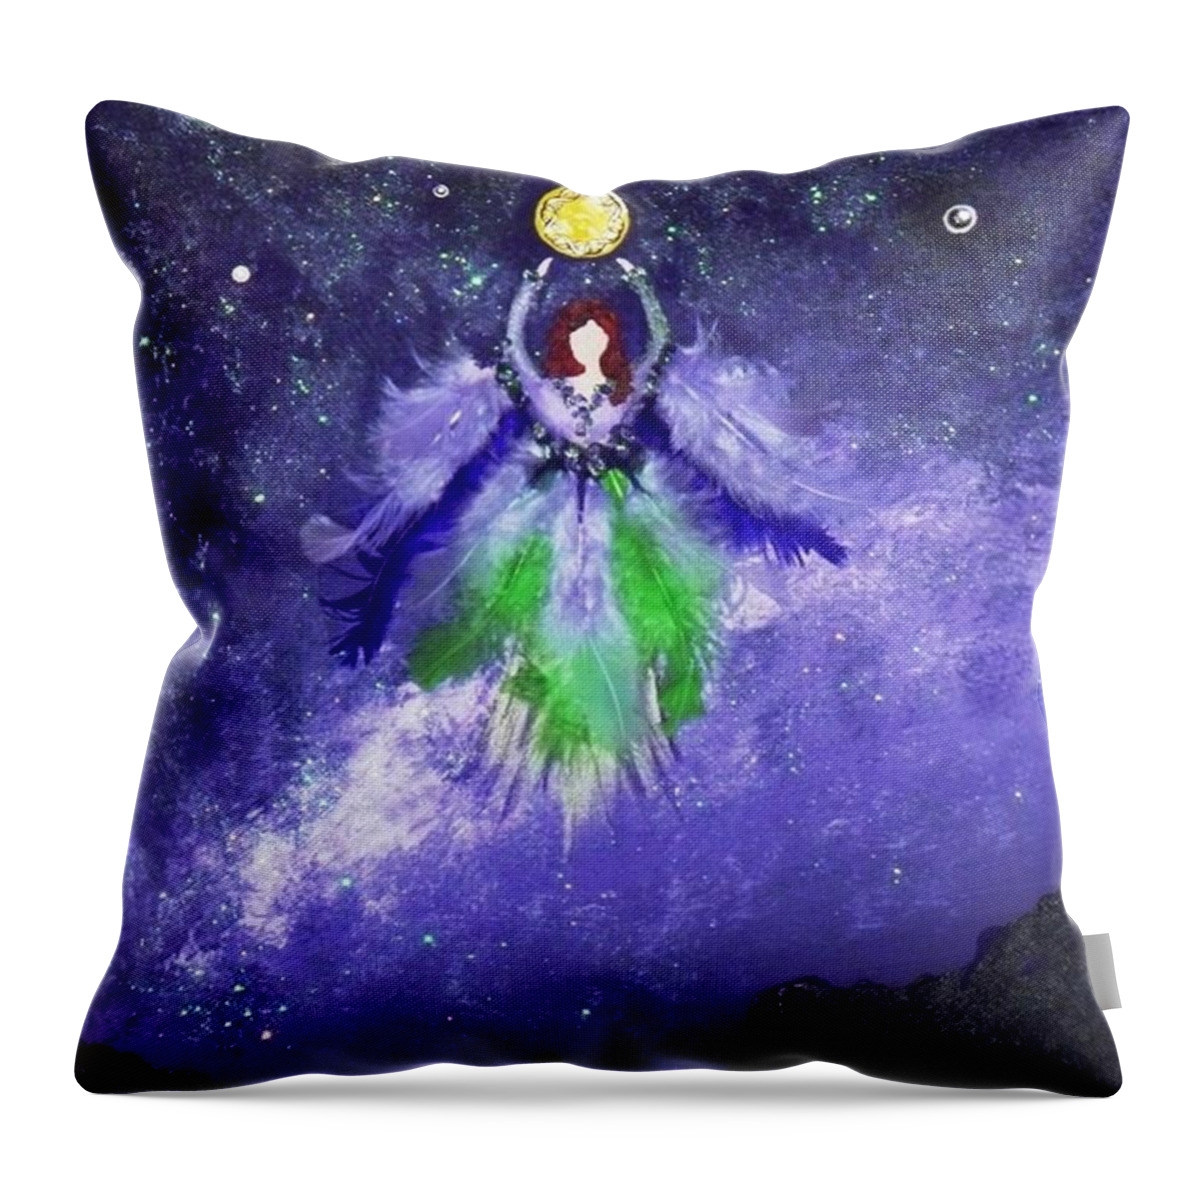 Mixed Media Throw Pillow featuring the painting Survivor by Alys Caviness-Gober